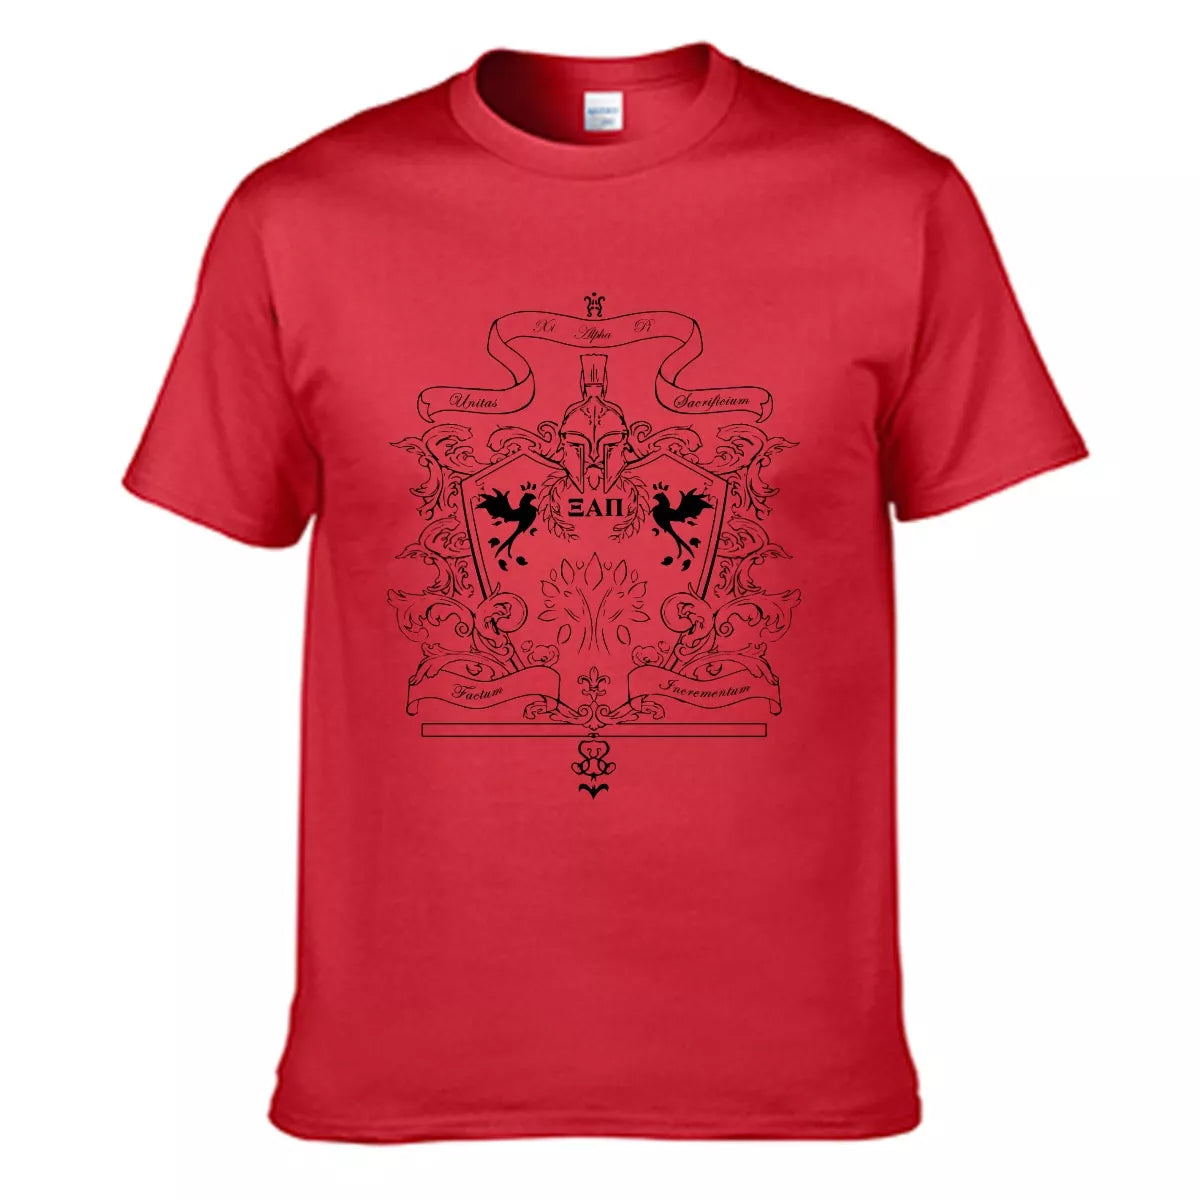 Coat of Arms Tee